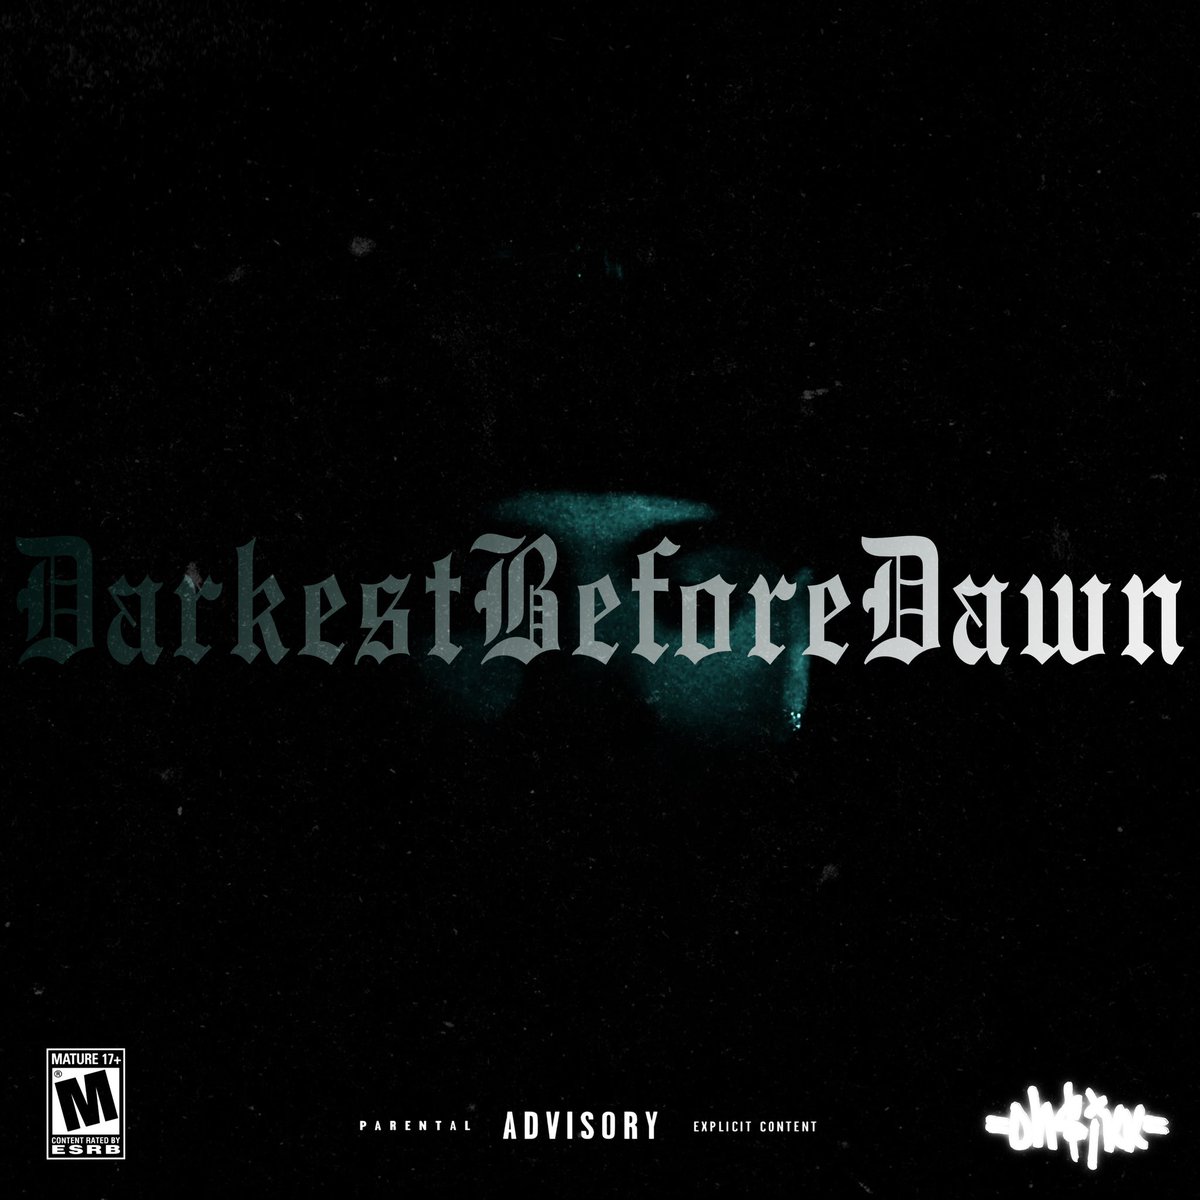 6 Song Ep dropping 11/31 👀
“DarkestBeforeDawn”🌗
Link in bio 📲📲
#artist #AppleMusic #Spotify #YoutubeMusic #SoundCloud #Youtube #Underground #ohsixx